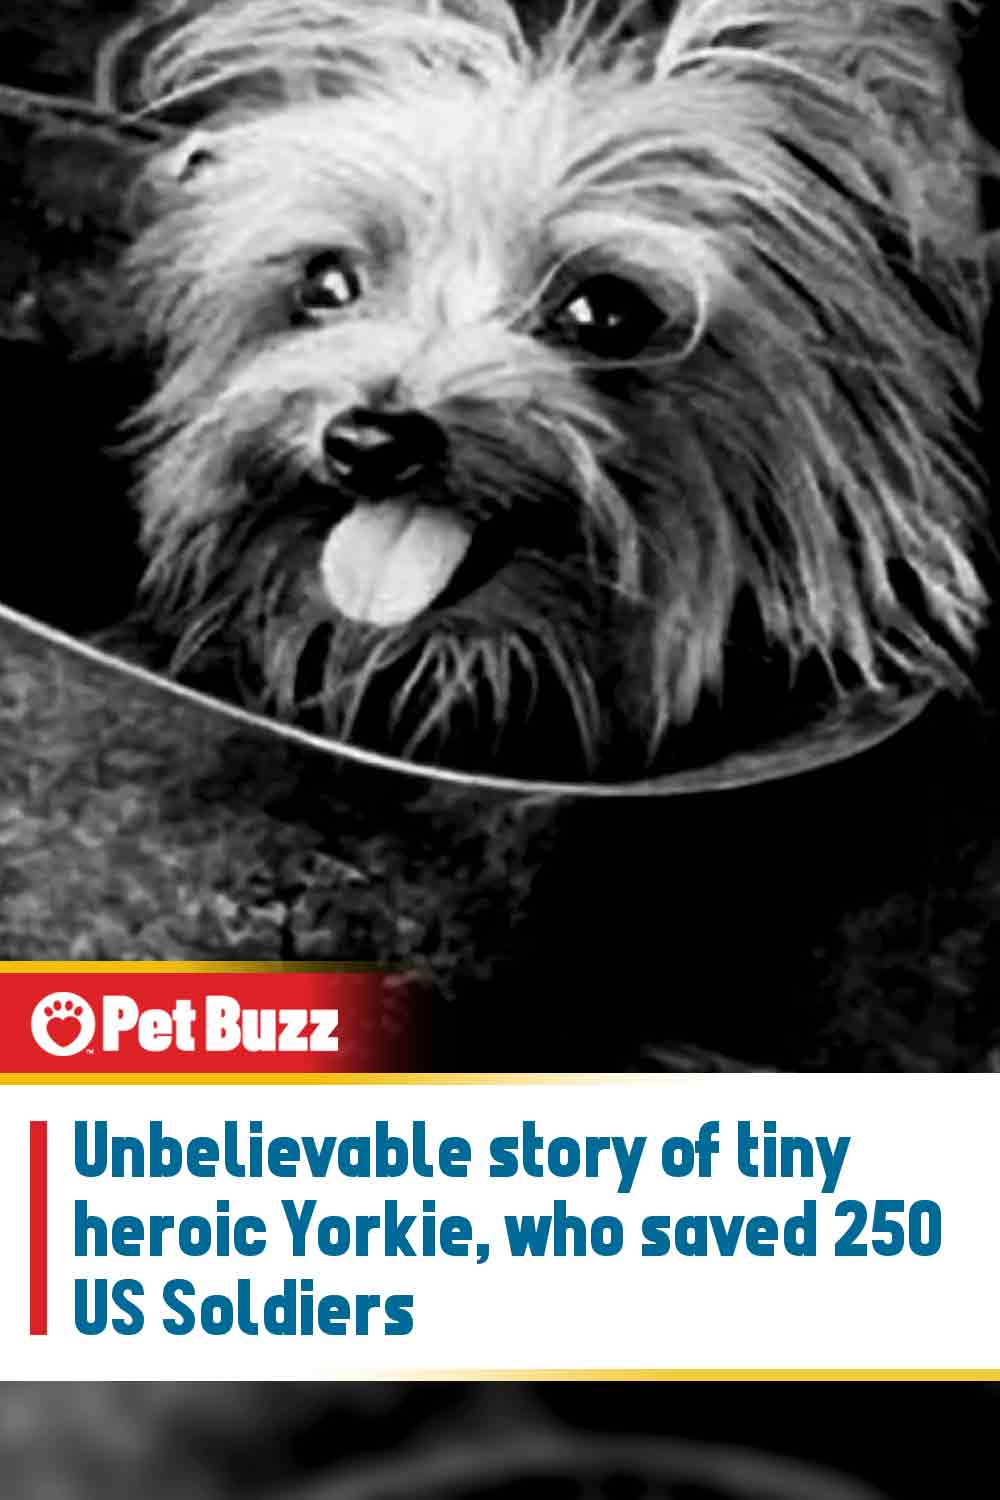 Unbelievable story of tiny heroic Yorkie, who saved 250 US Soldiers